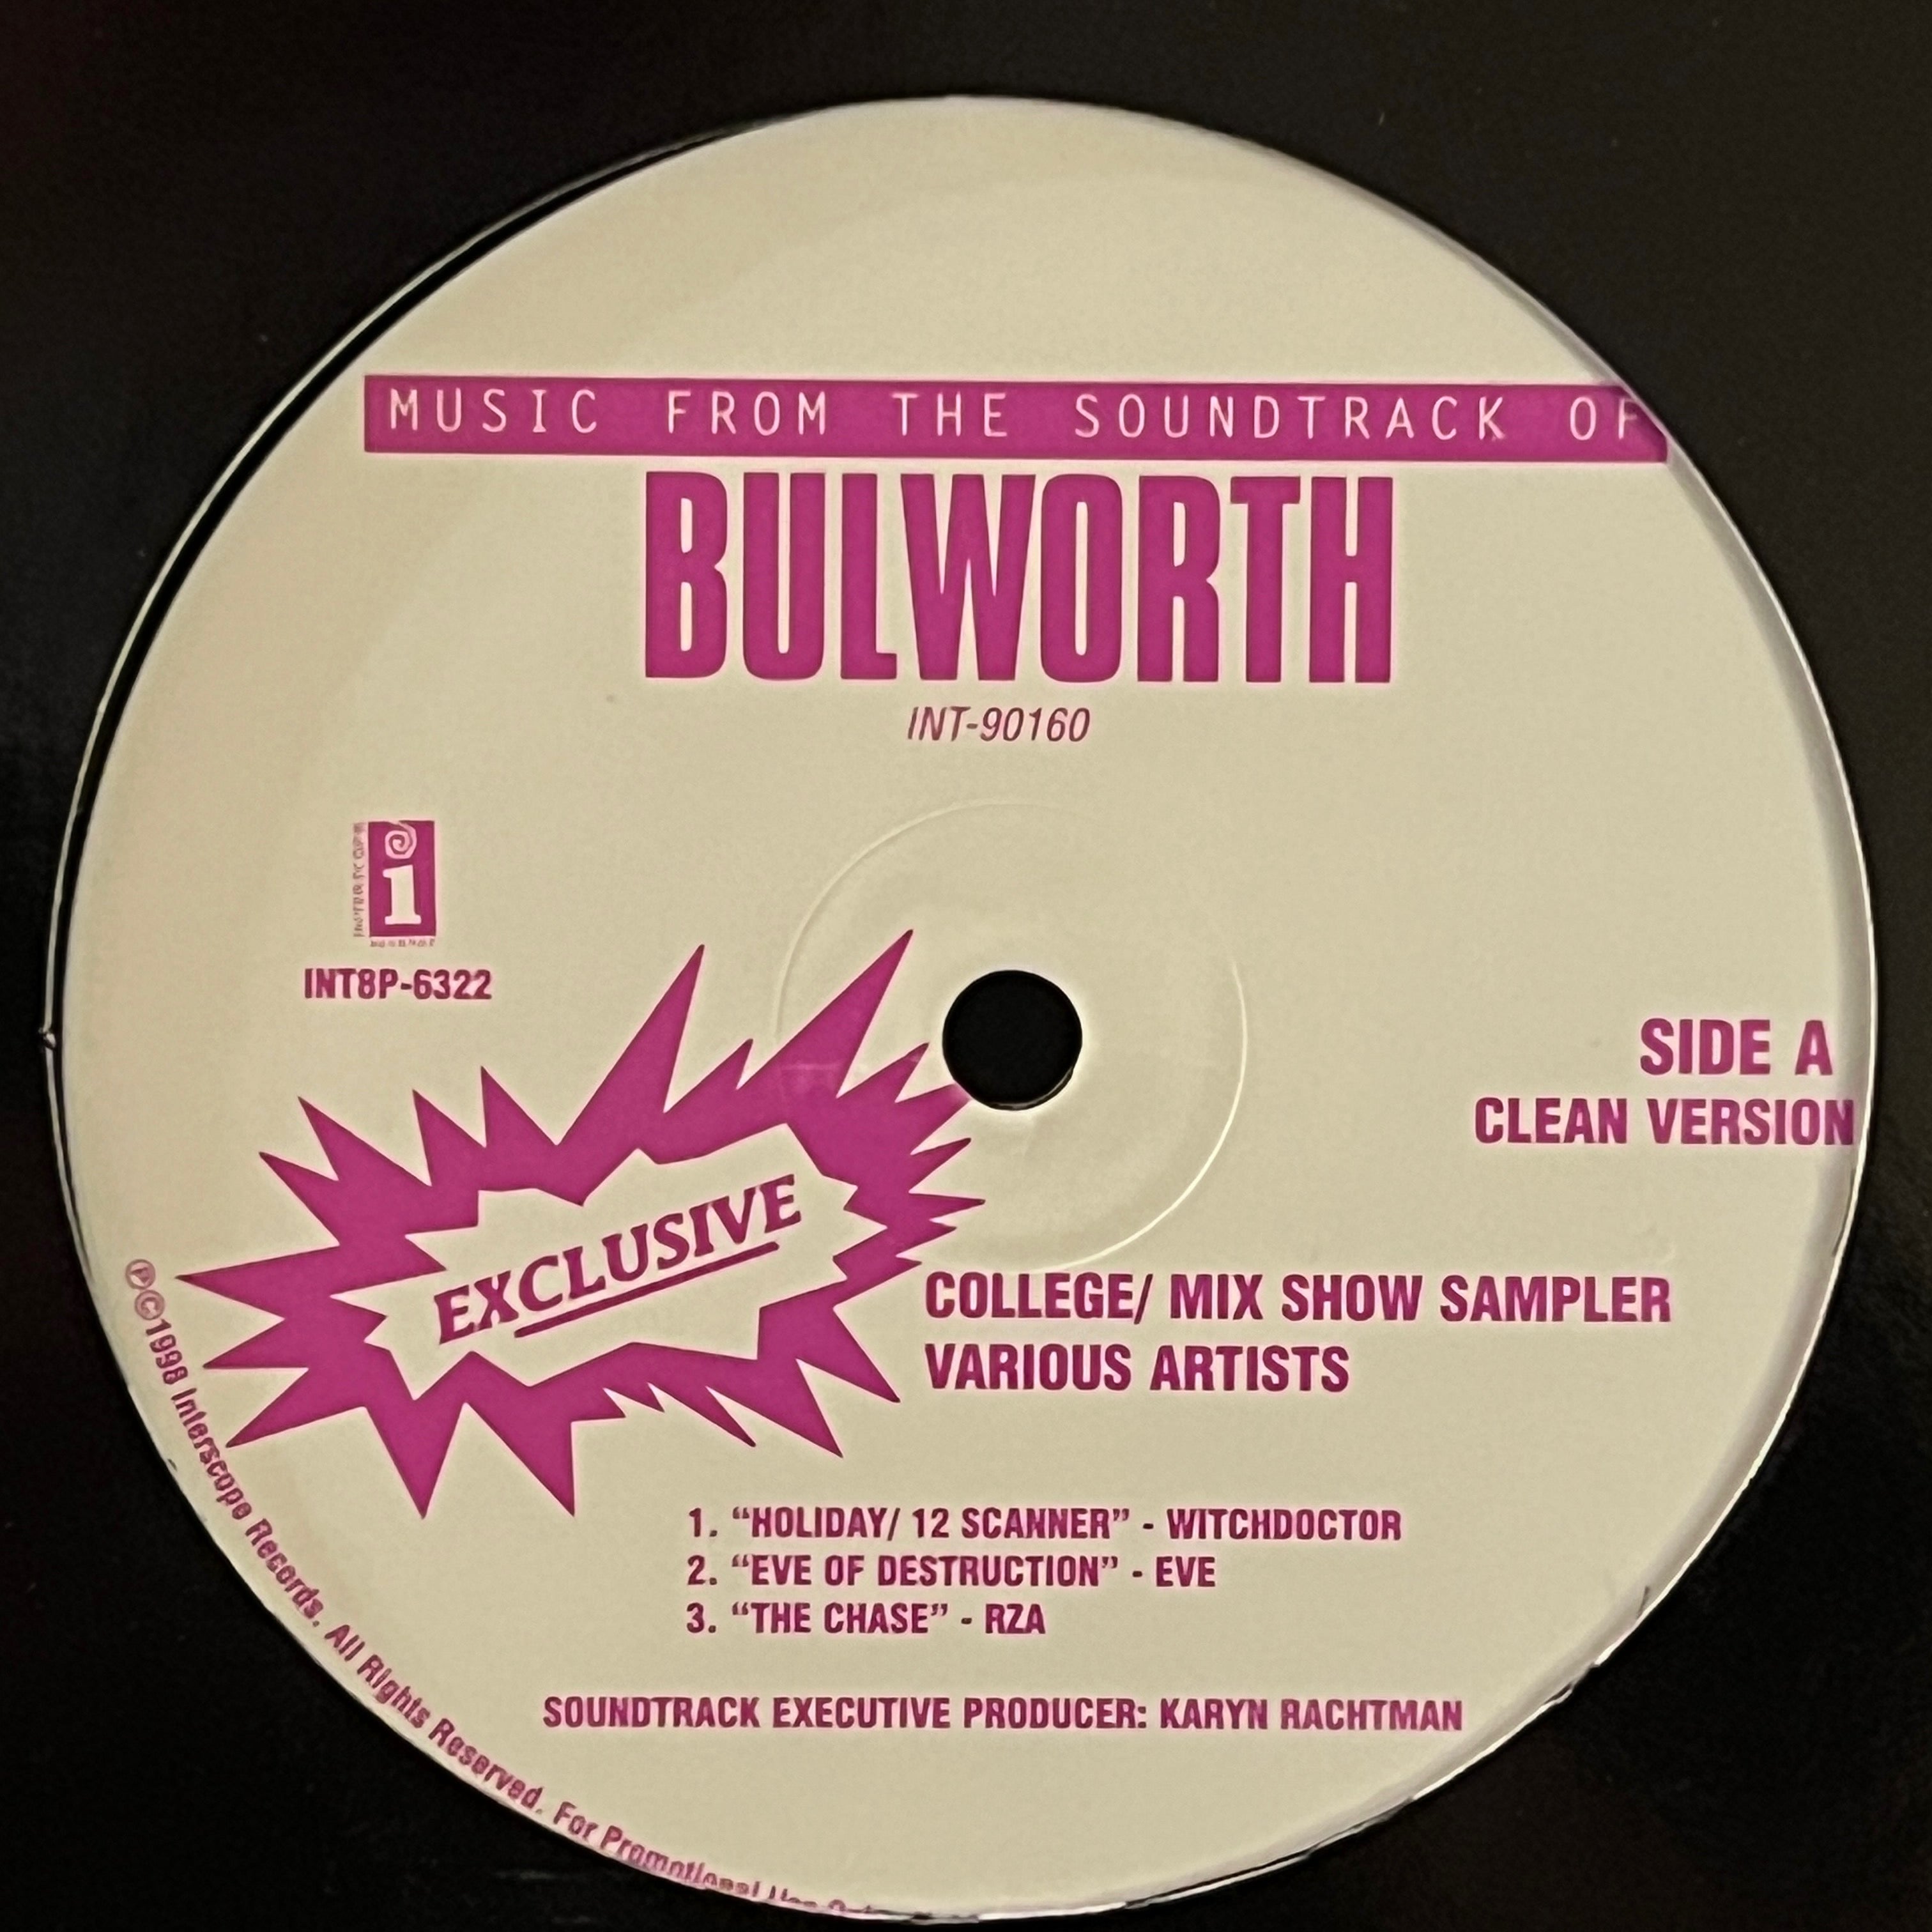 Music From The Soundtrack of Bulworth (College/Mix Show Sampler) (12" Vinyl) VG+